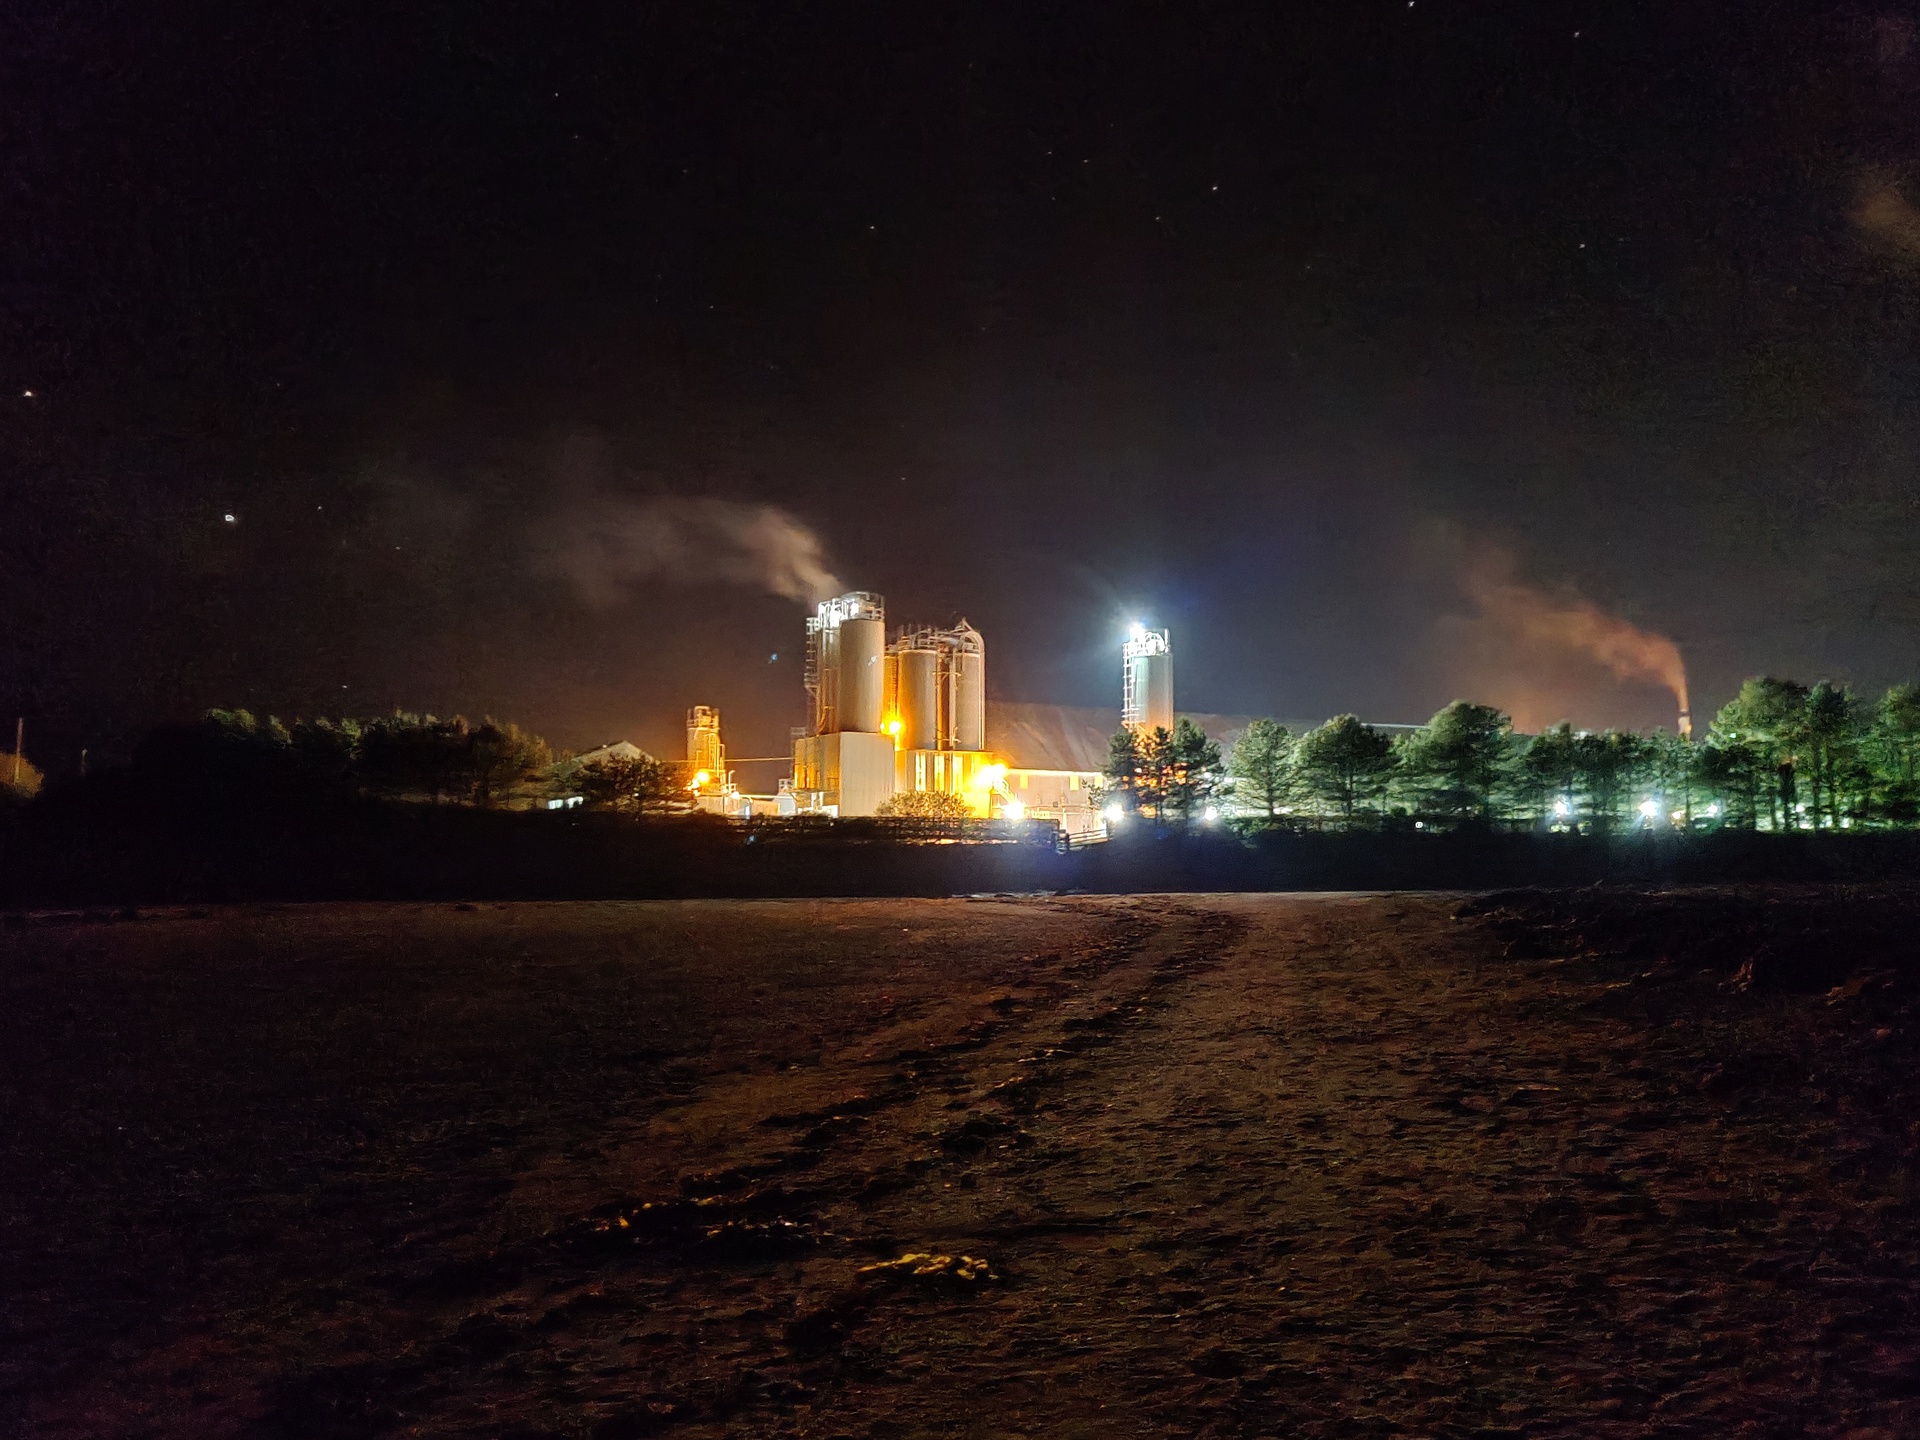 OnePlus 8T night mode camera sample of a factory at standard exposure